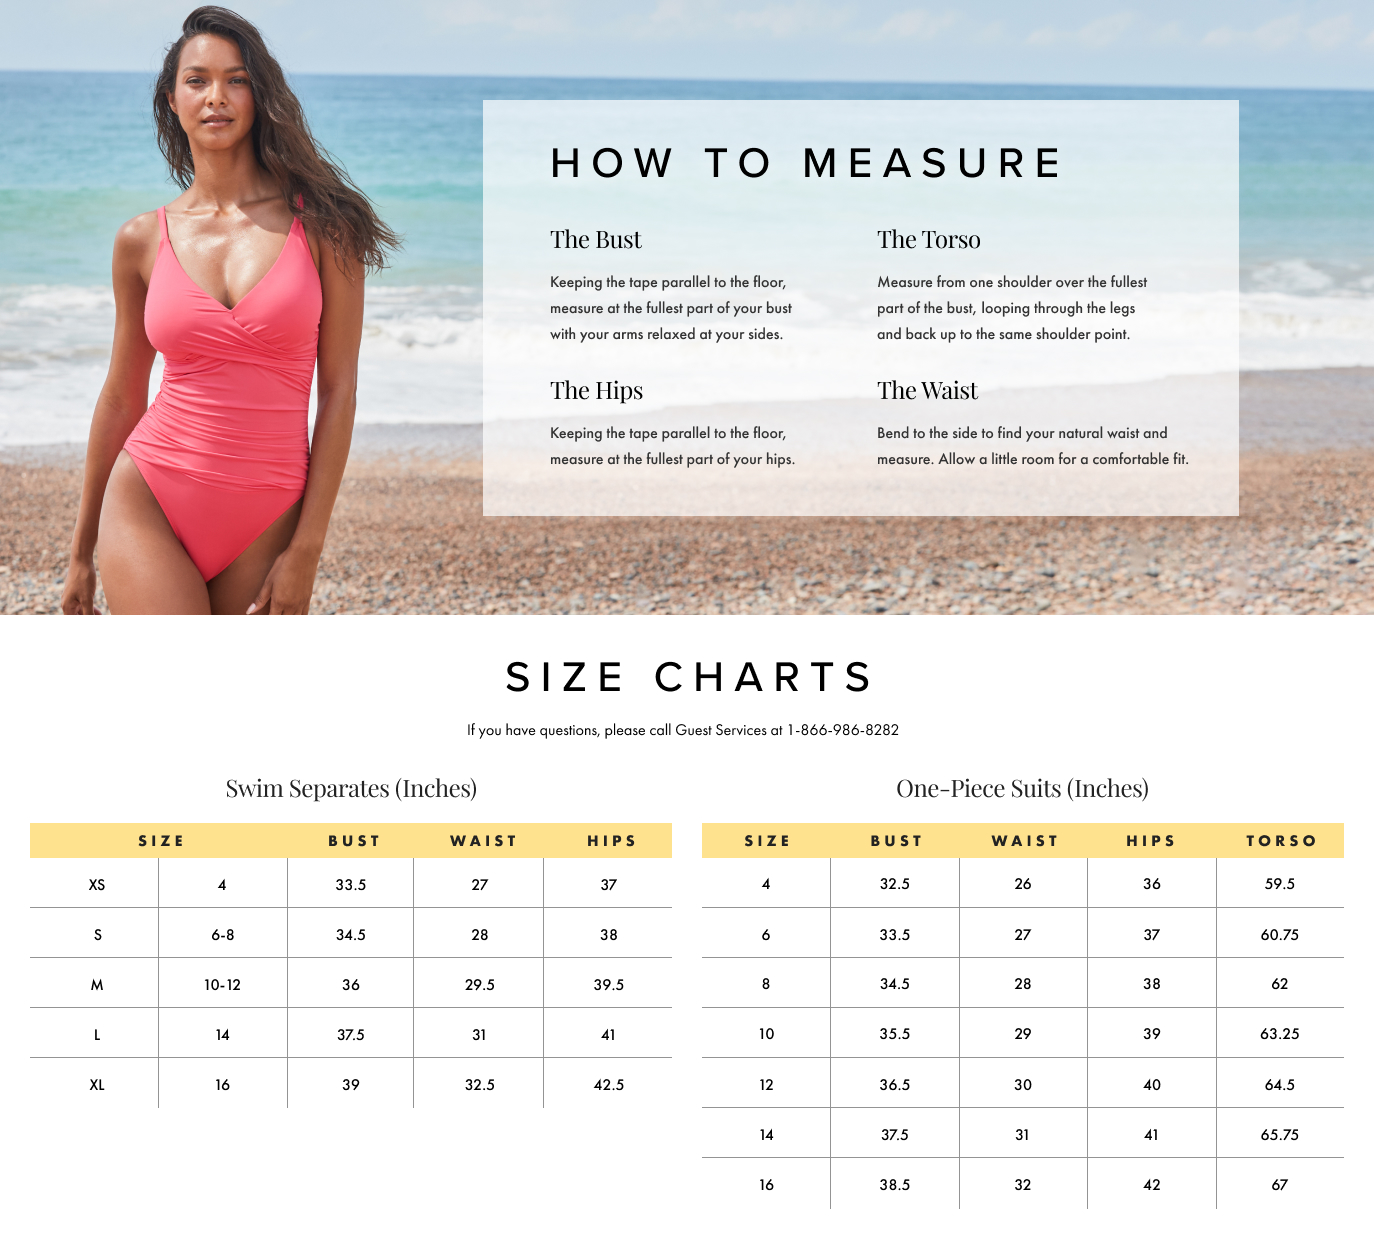 How To Measure and Size Charts